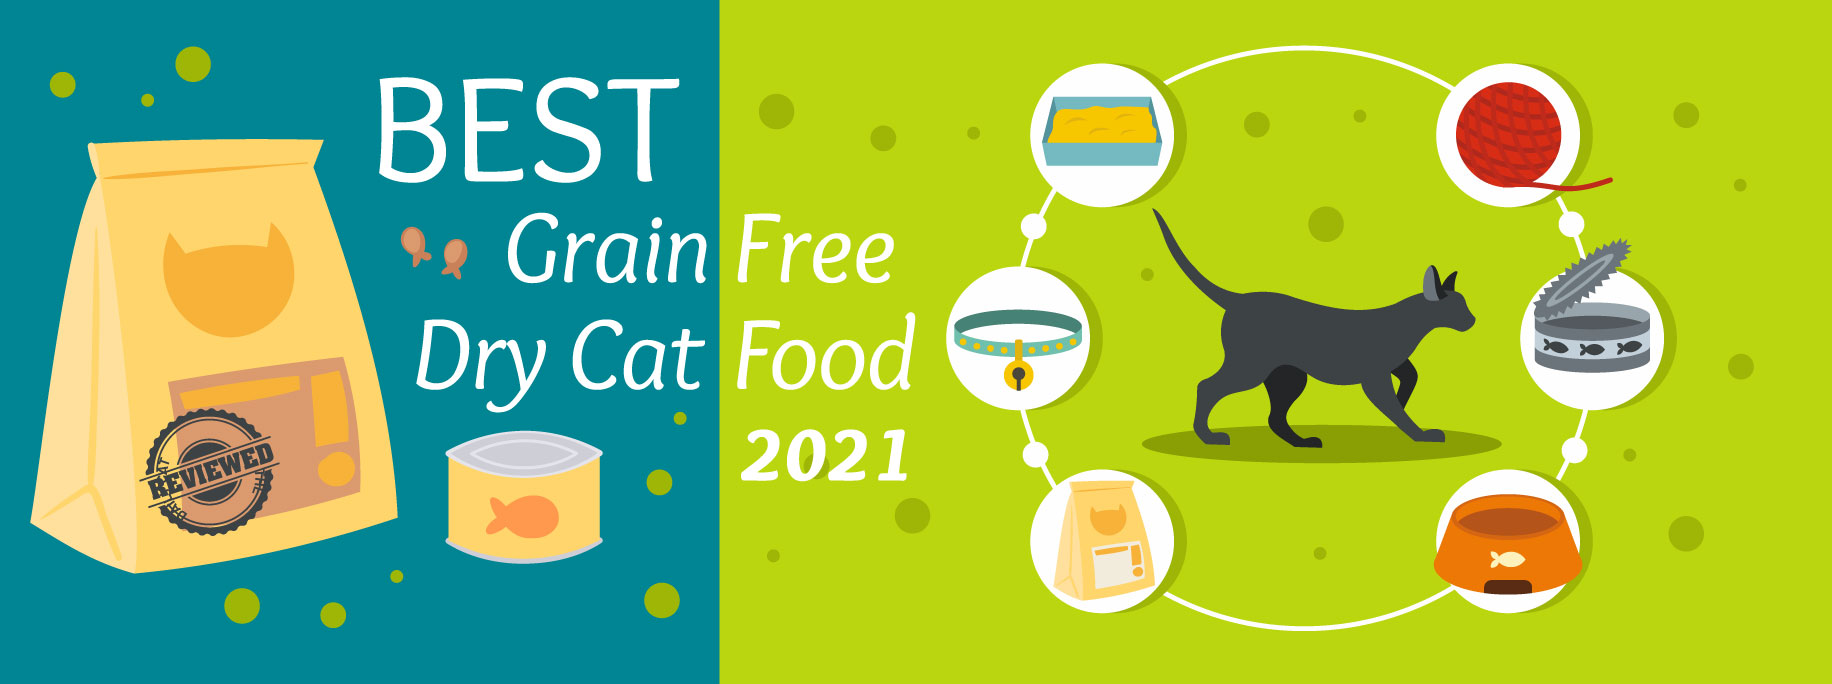 The Daily Cat - Best Grain Free Cat Food Graphic